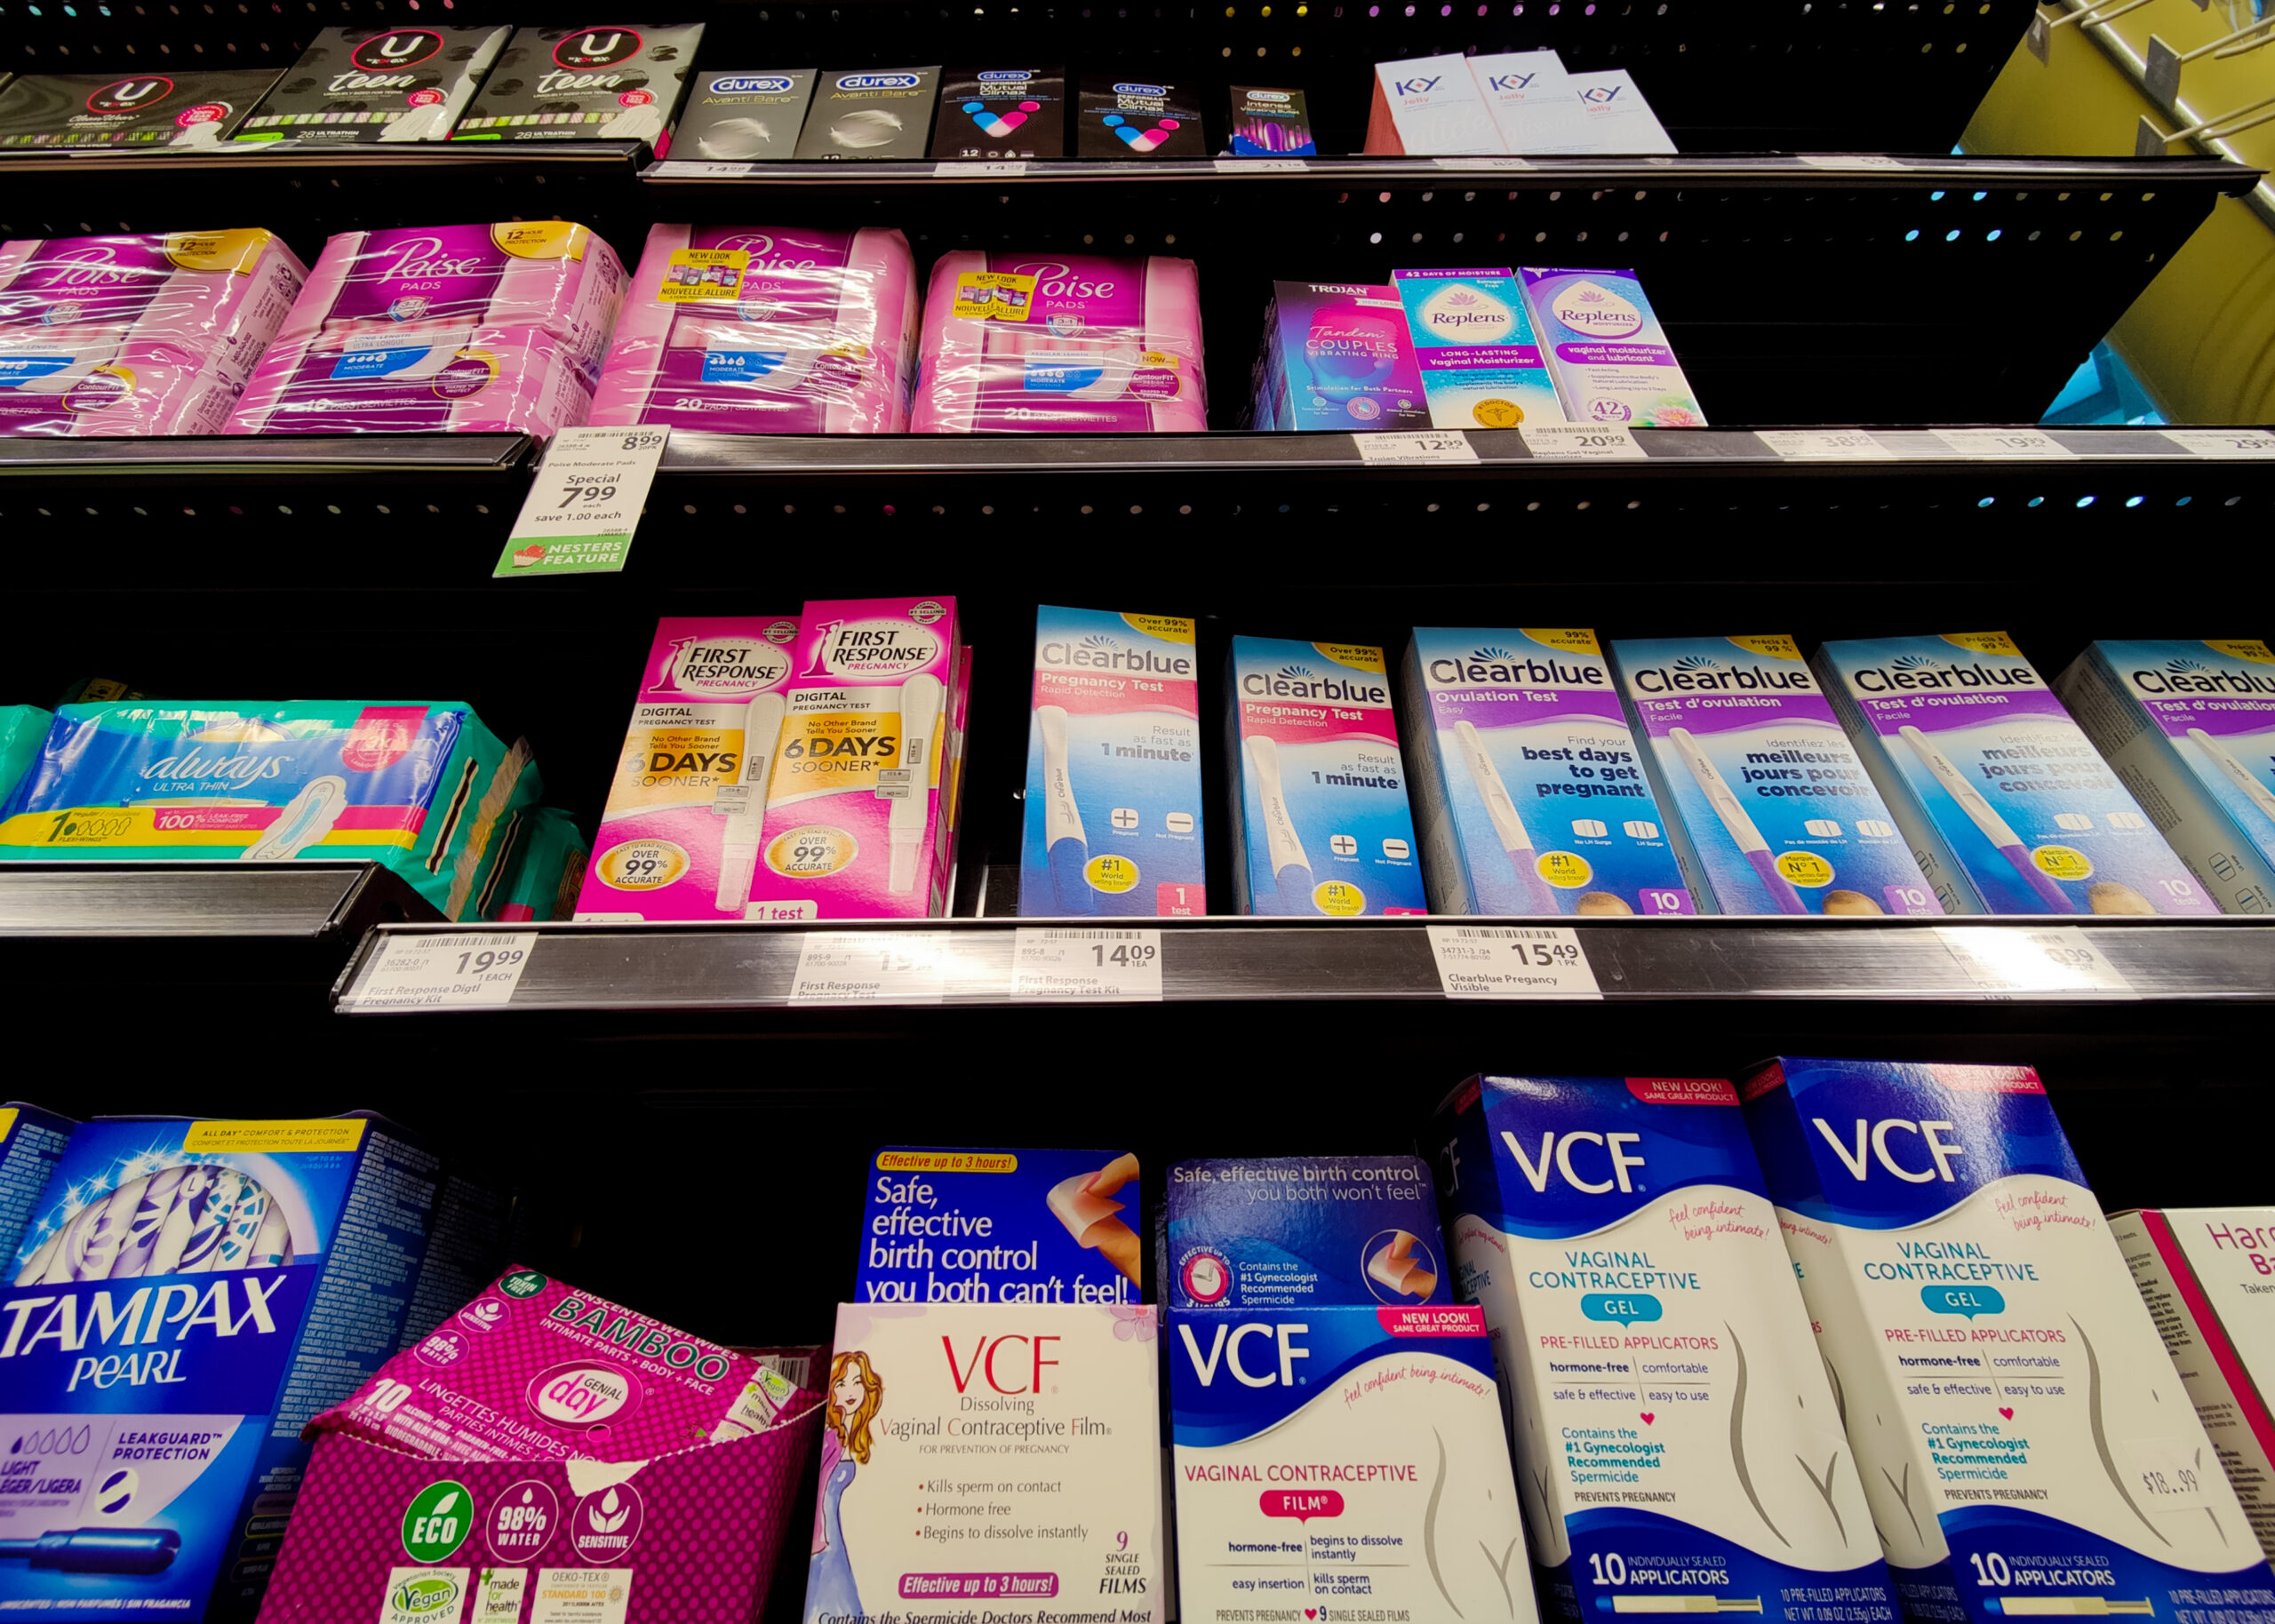 This is a photo of pregnancy test, contraceptive gel, and tampons on a store market shelf.